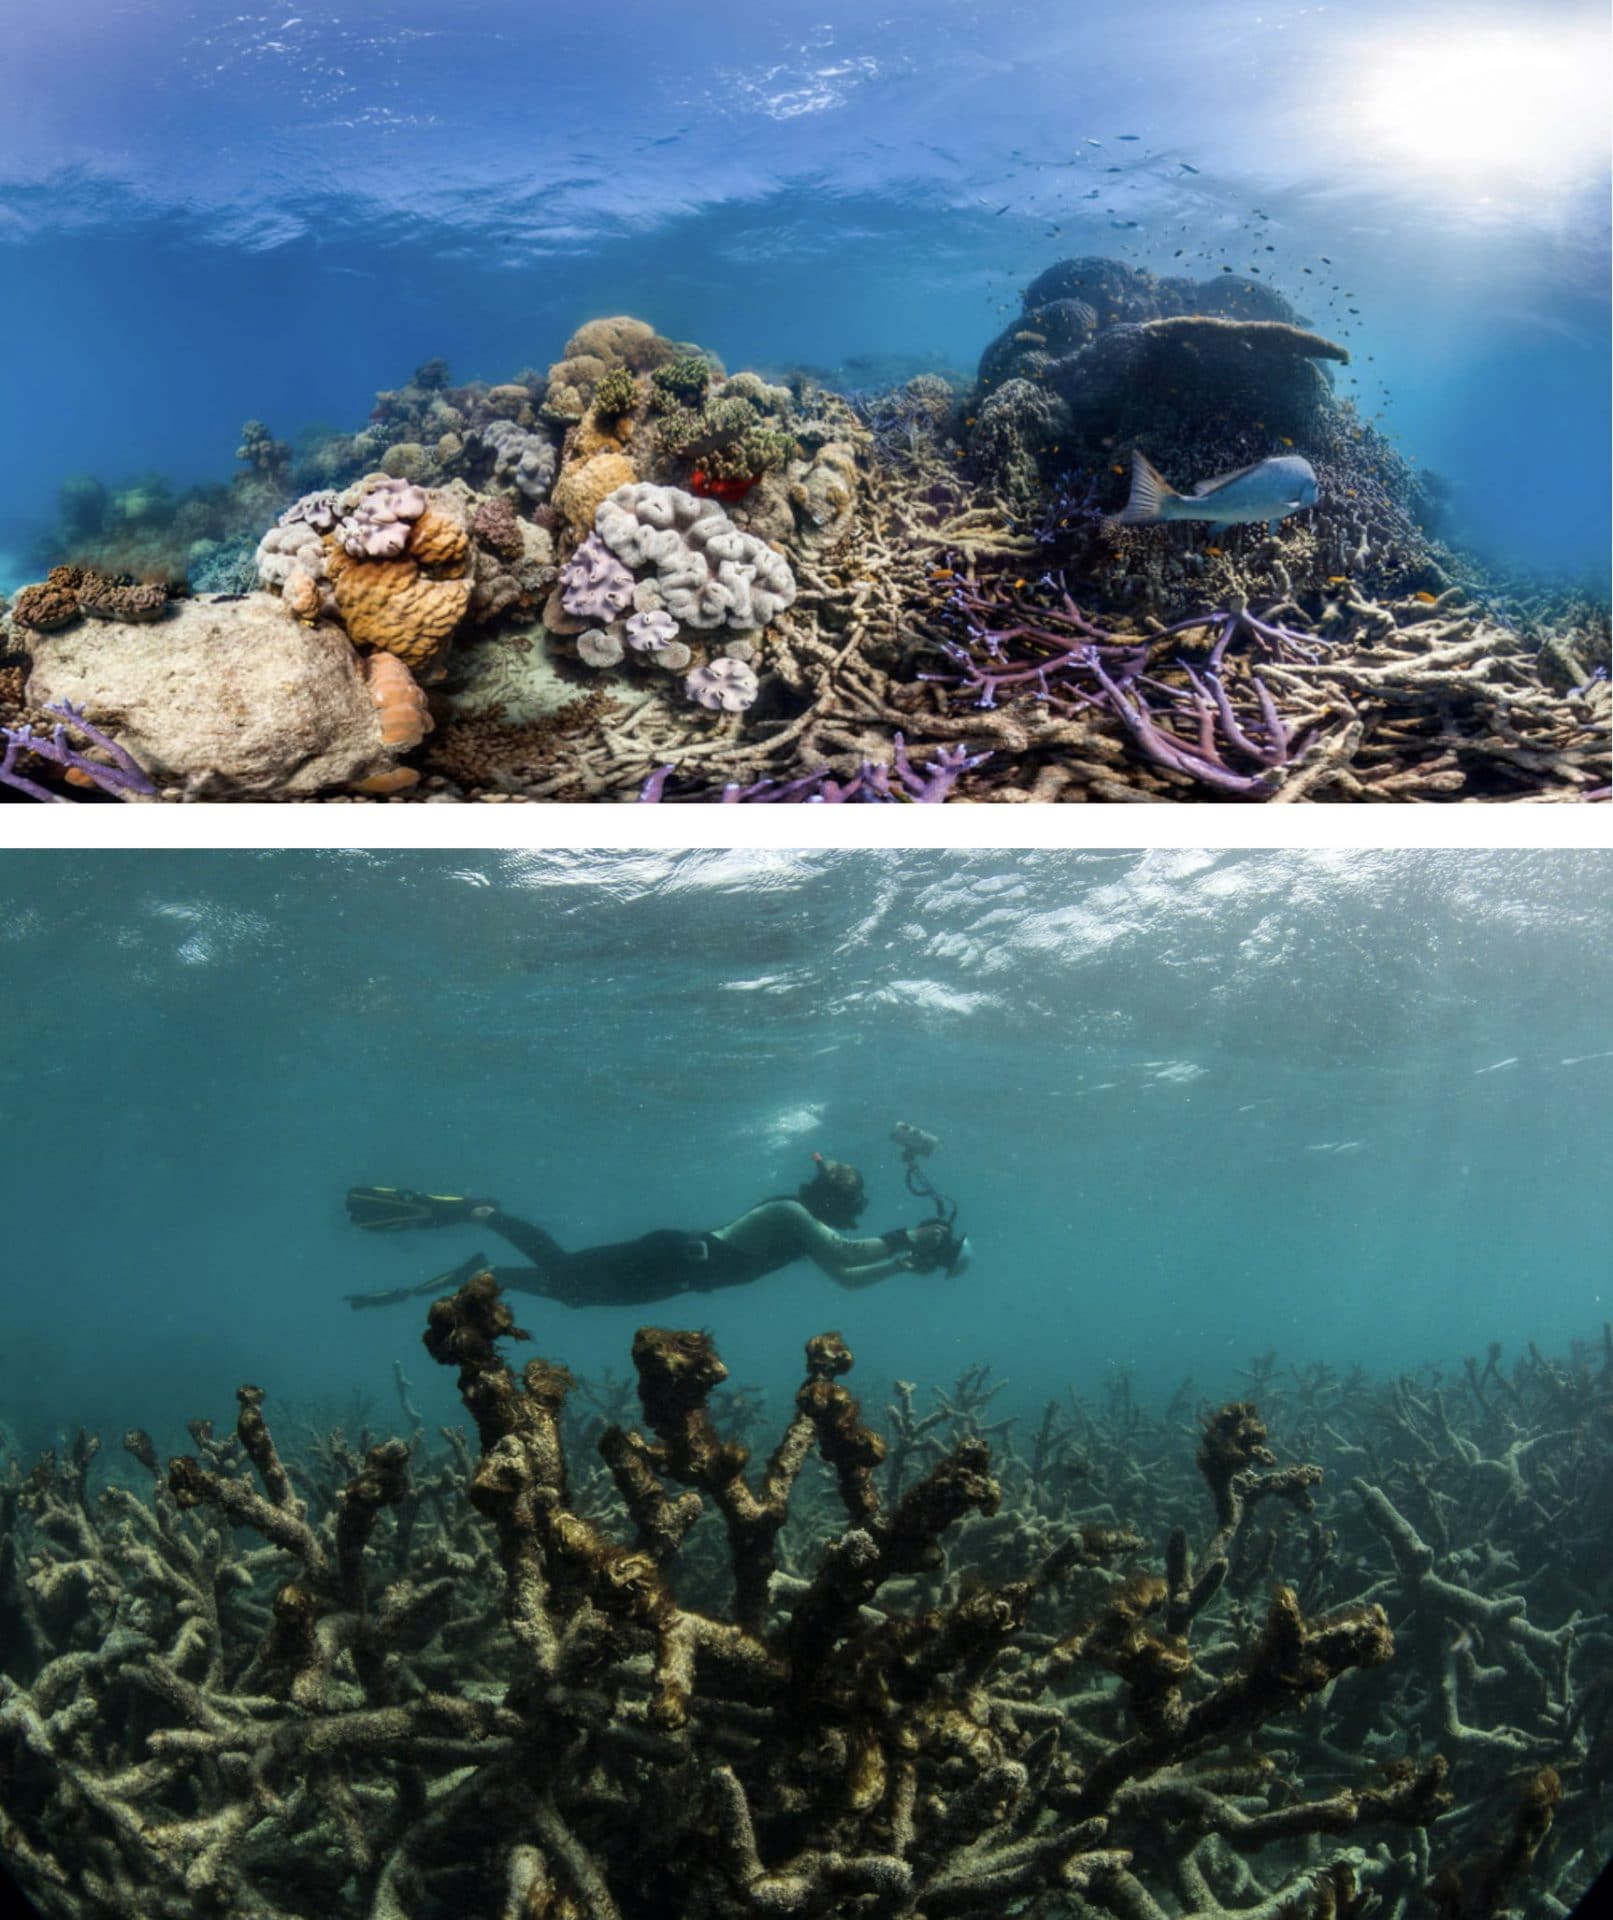 Literally cooked in hot water—what happened in the latest mass coral bleaching on the Great Barrier Reef - Bulletin of the Atomic Scientists